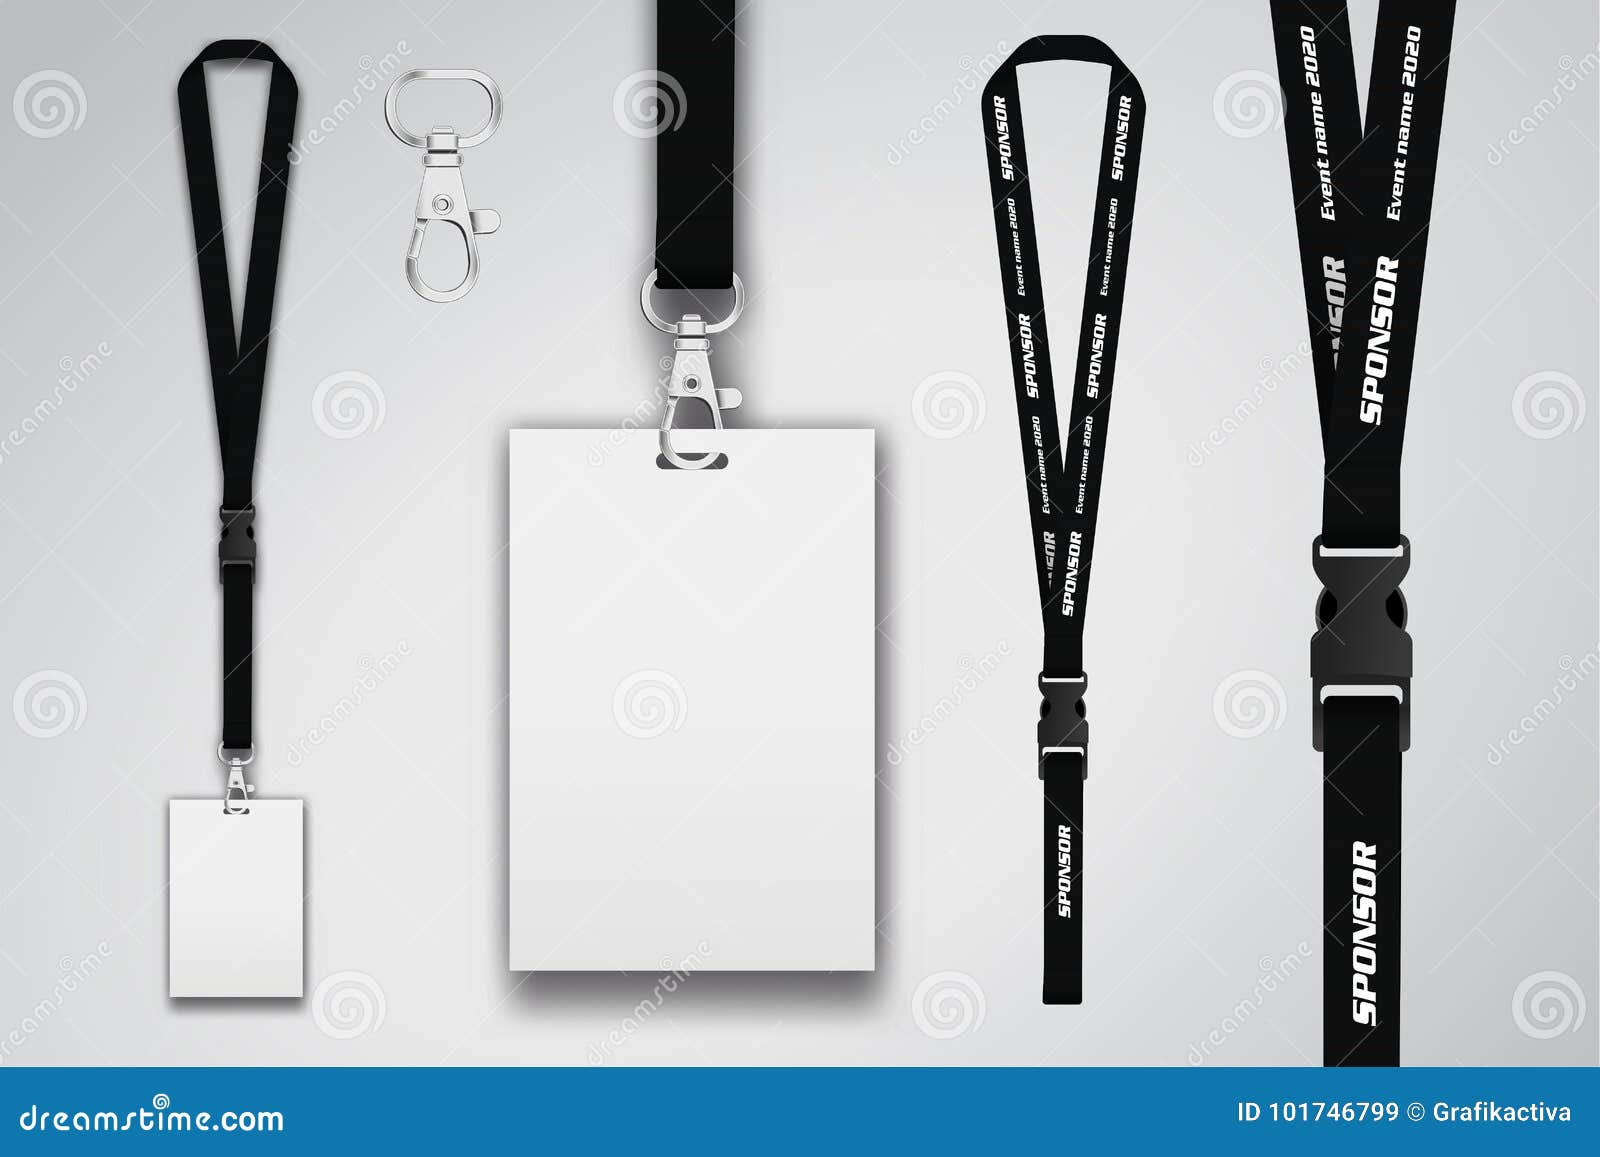  of lanyard for backstage, party or event. access hanging identification. ribbon with place for sponsor